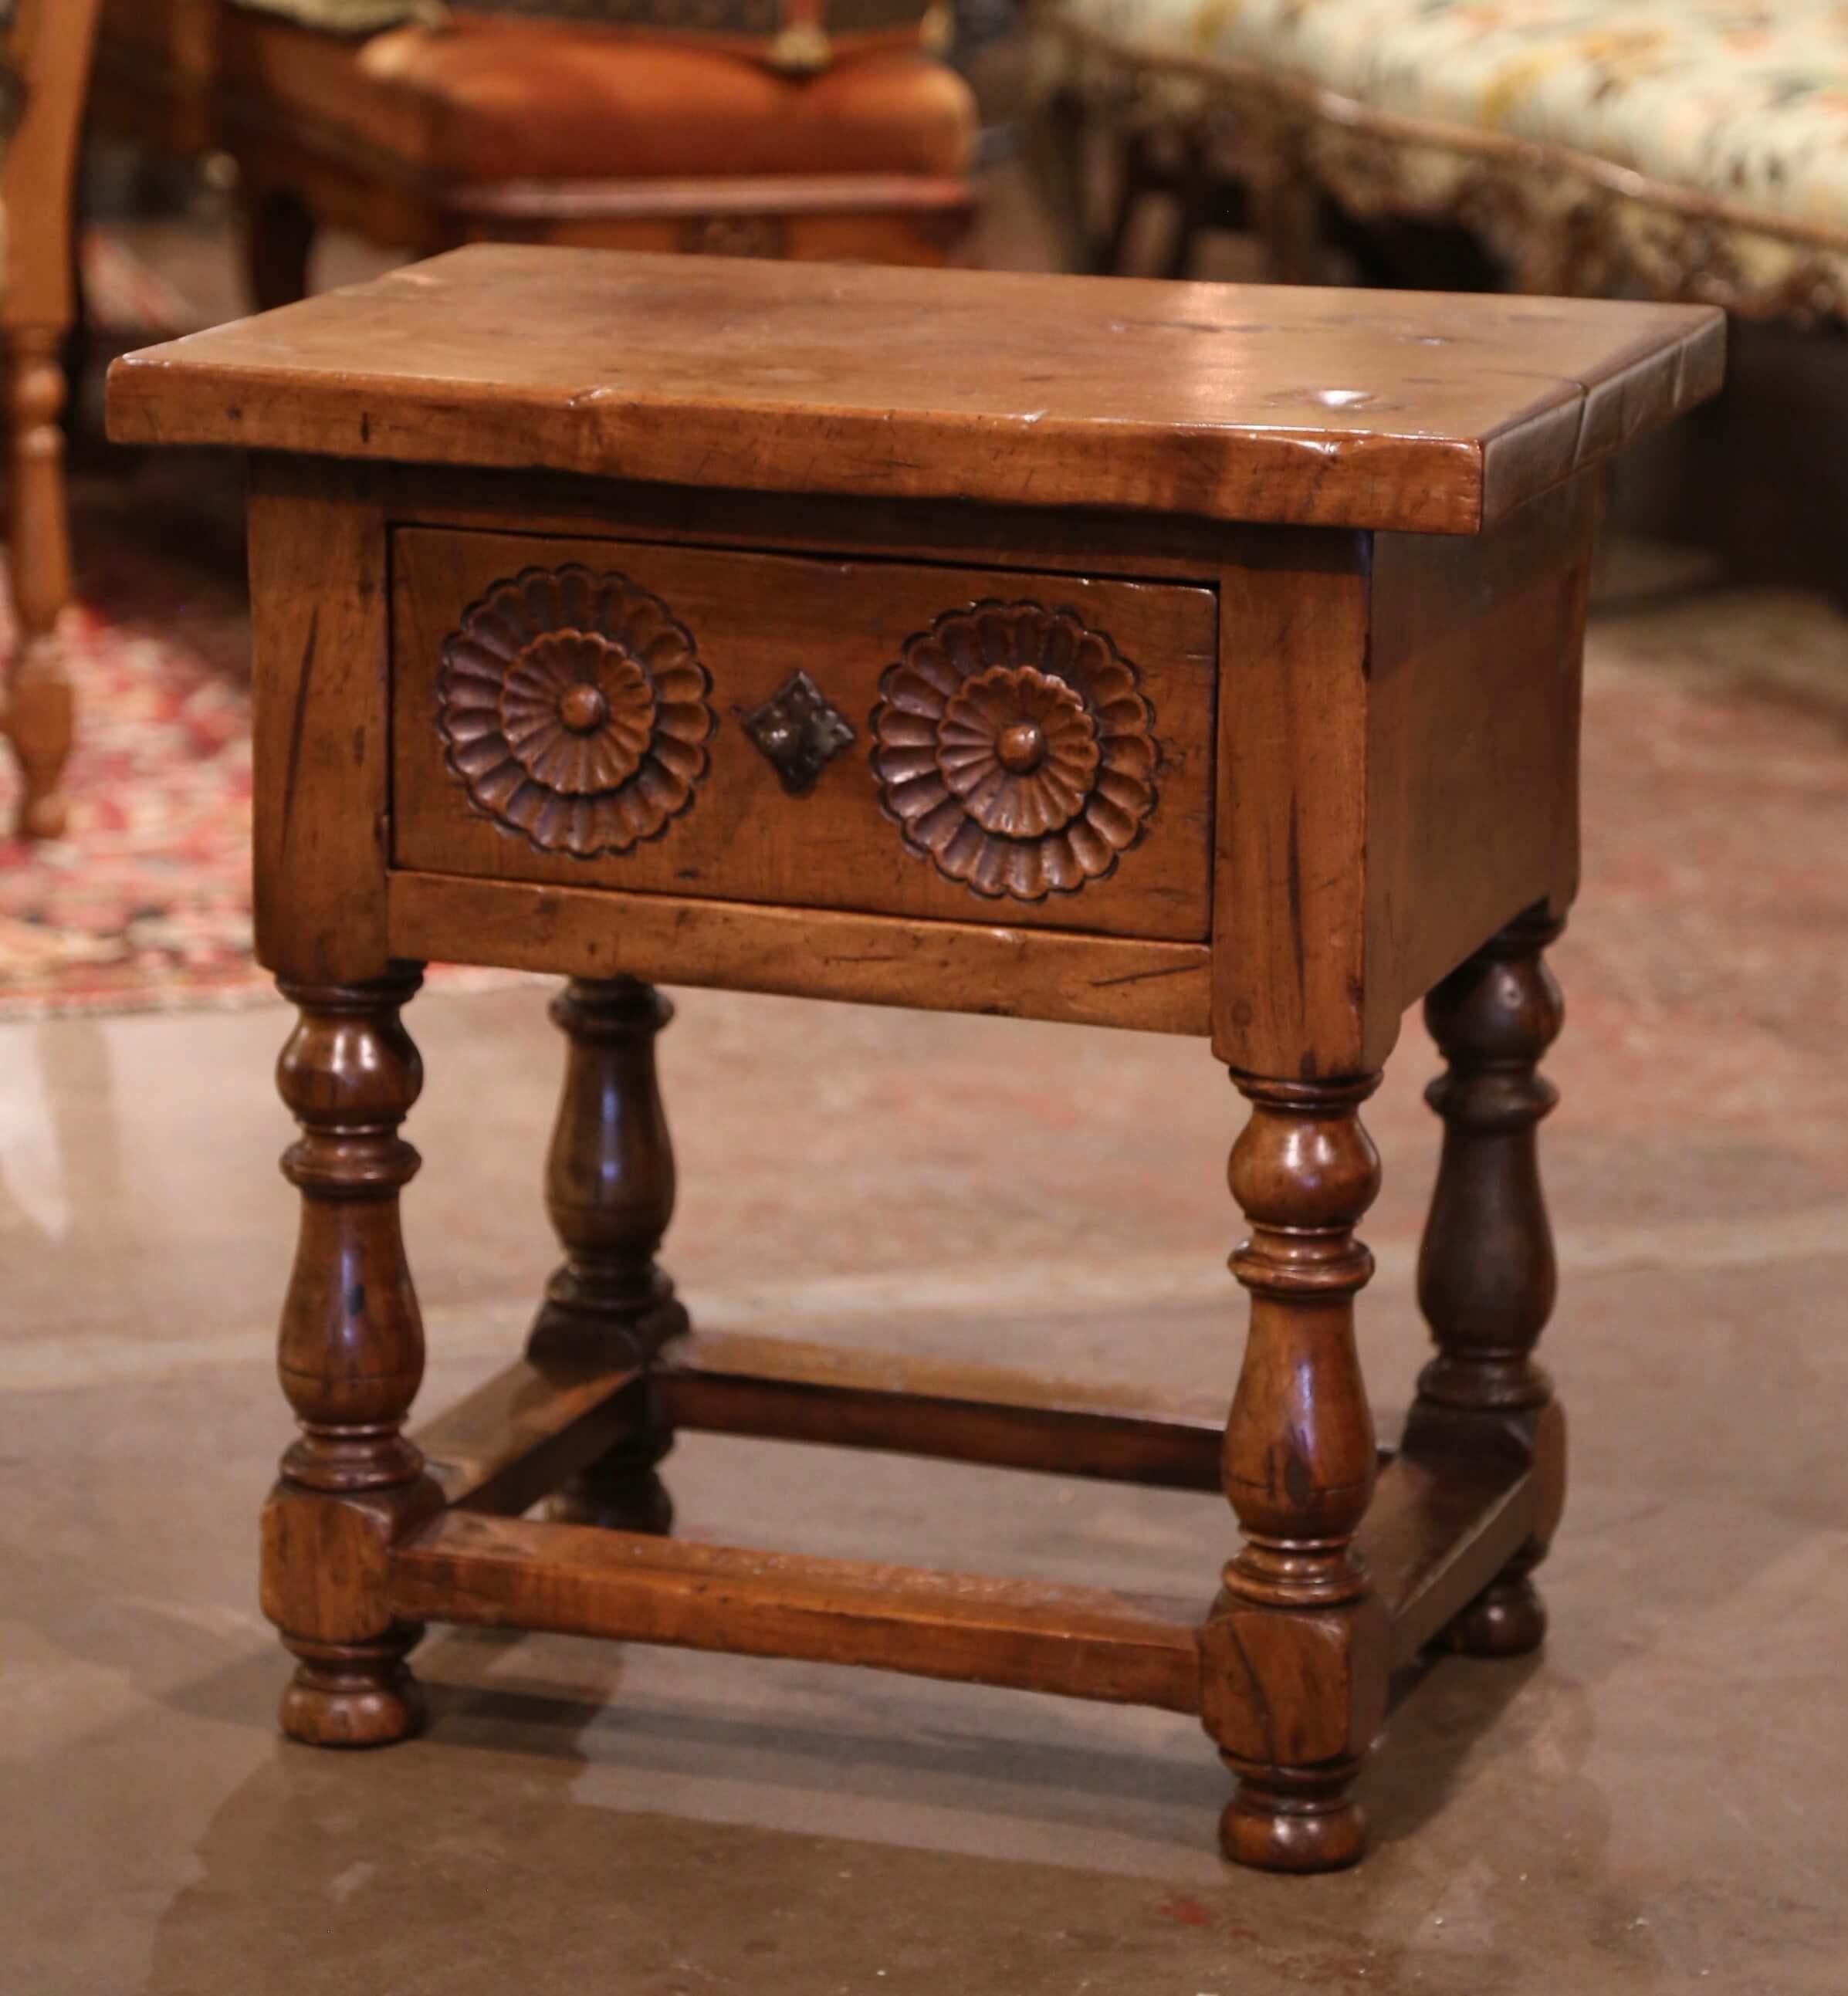 Incorporate extra, functional surface space into your living room or den with this elegant antique side table. Crafted in northern Spain circa 1880 and built of walnut, the side table stands on turned legs ending with bun feet, and embellished with